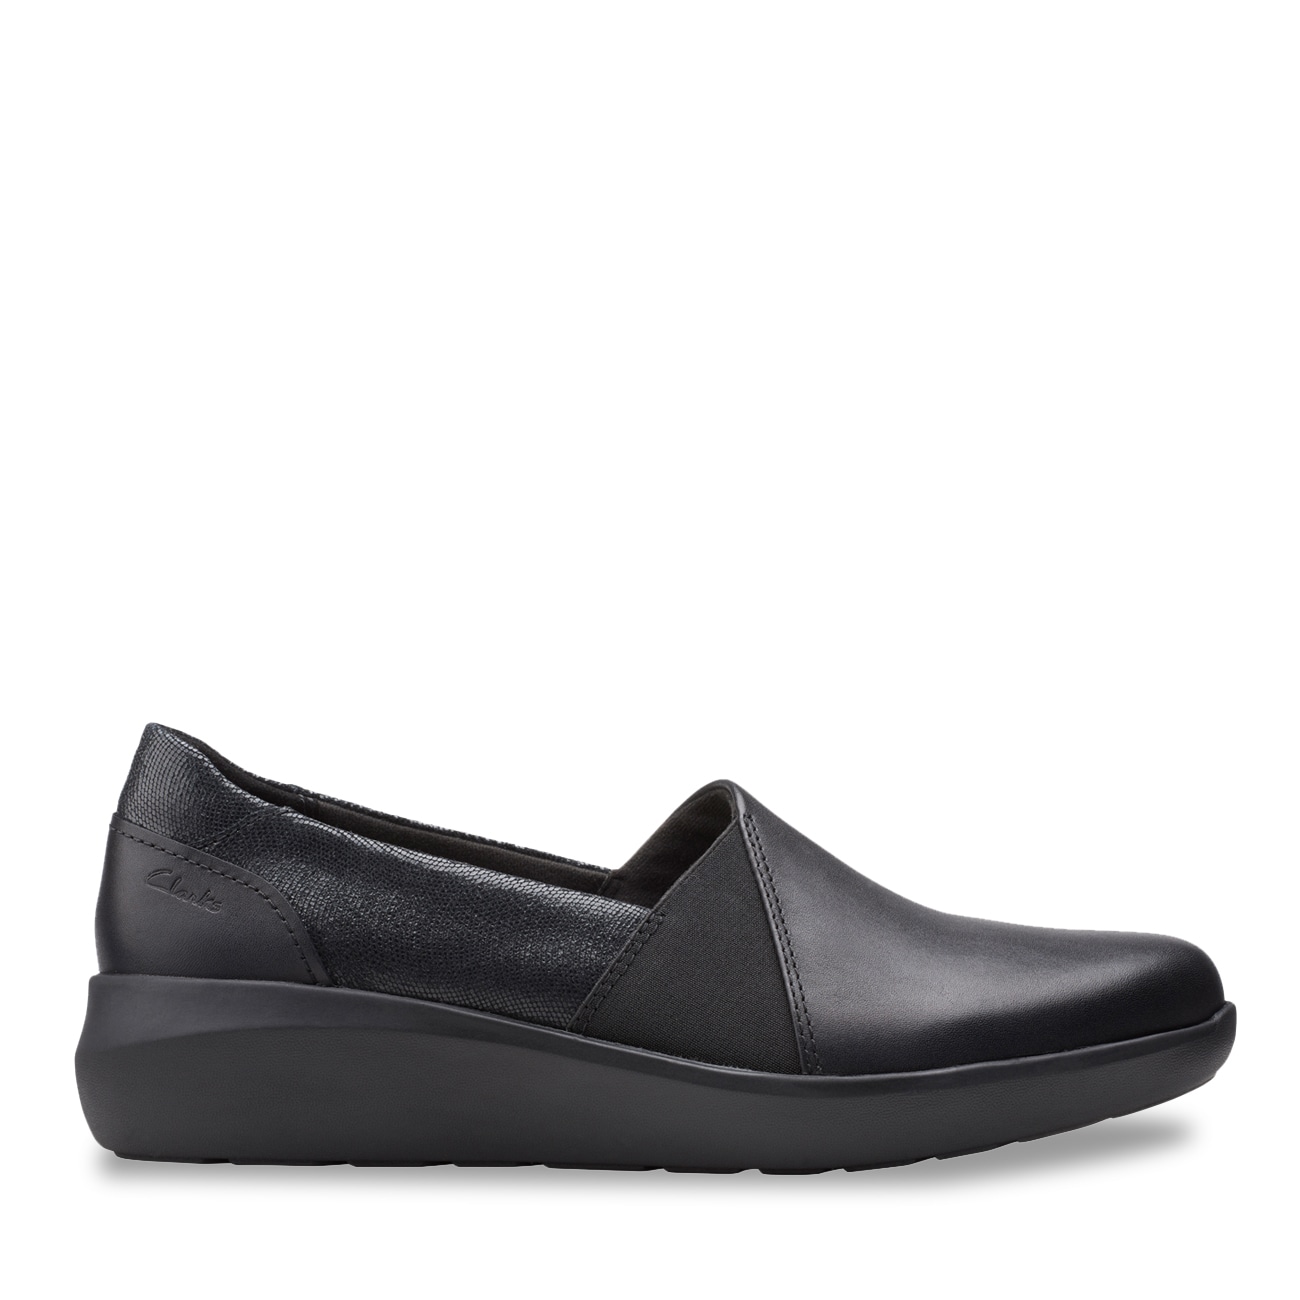 clarks sale slippers